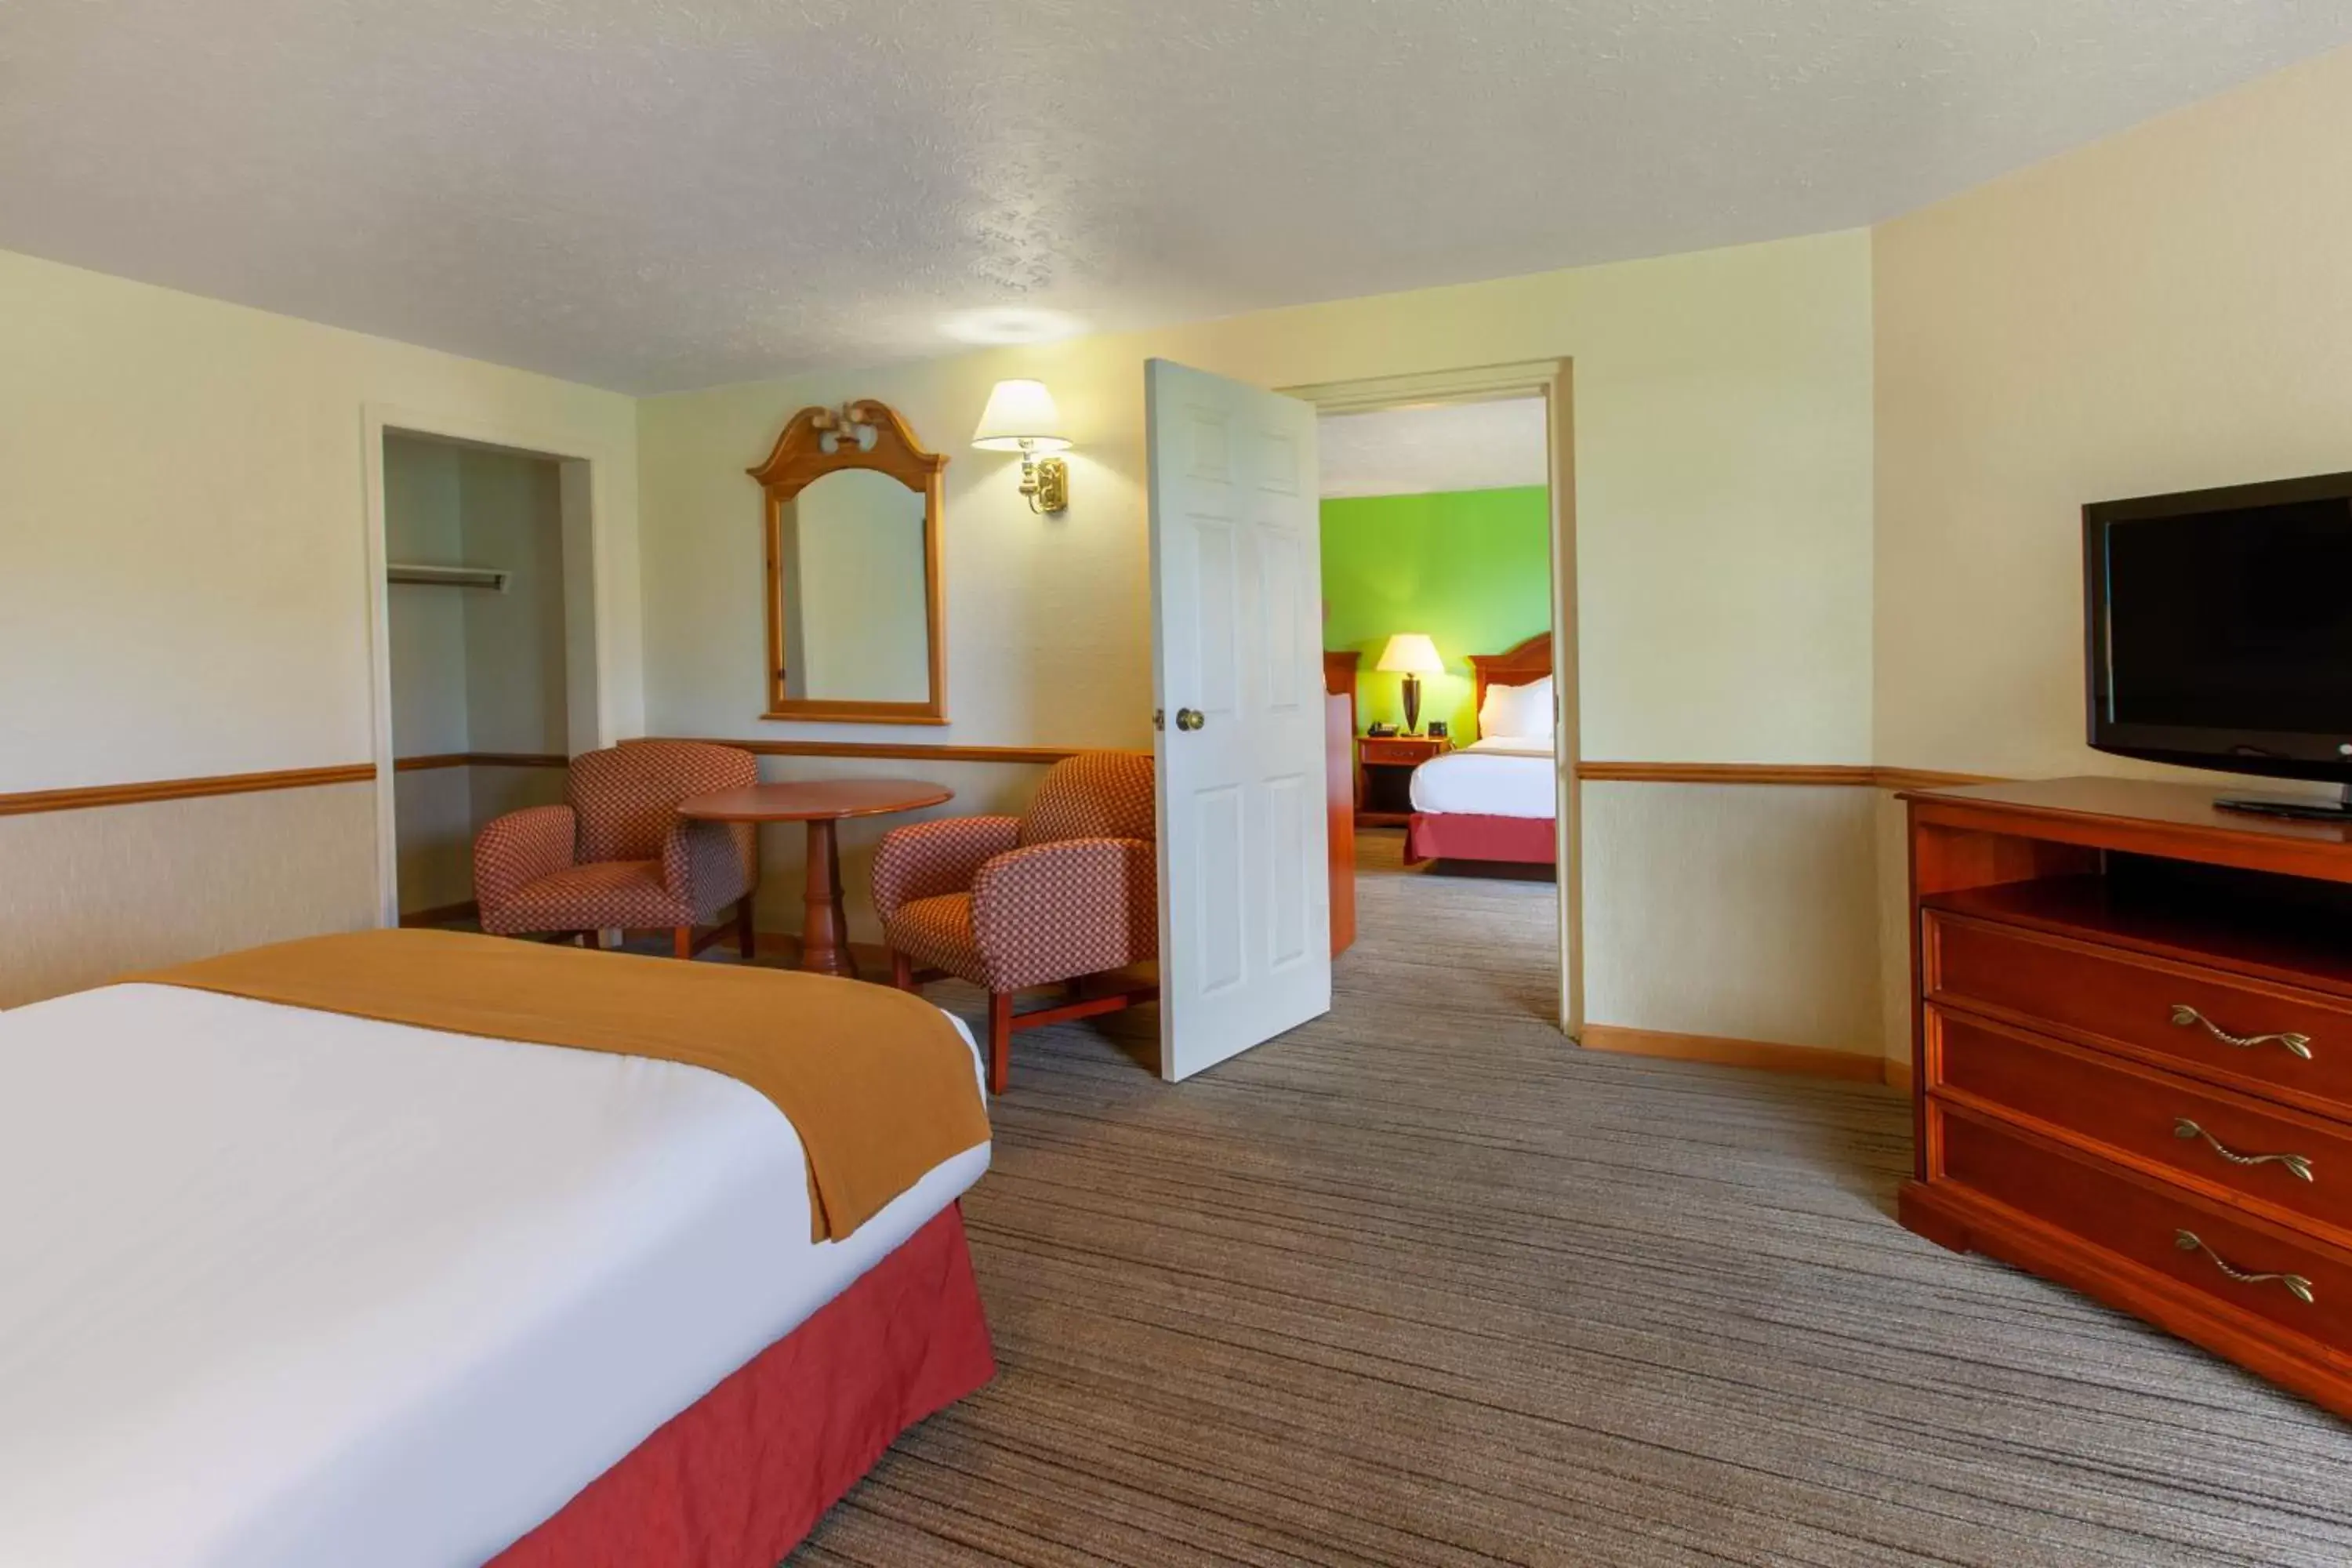 Bed, Room Photo in Apple Tree Inn; SureStay Collection by Best Western